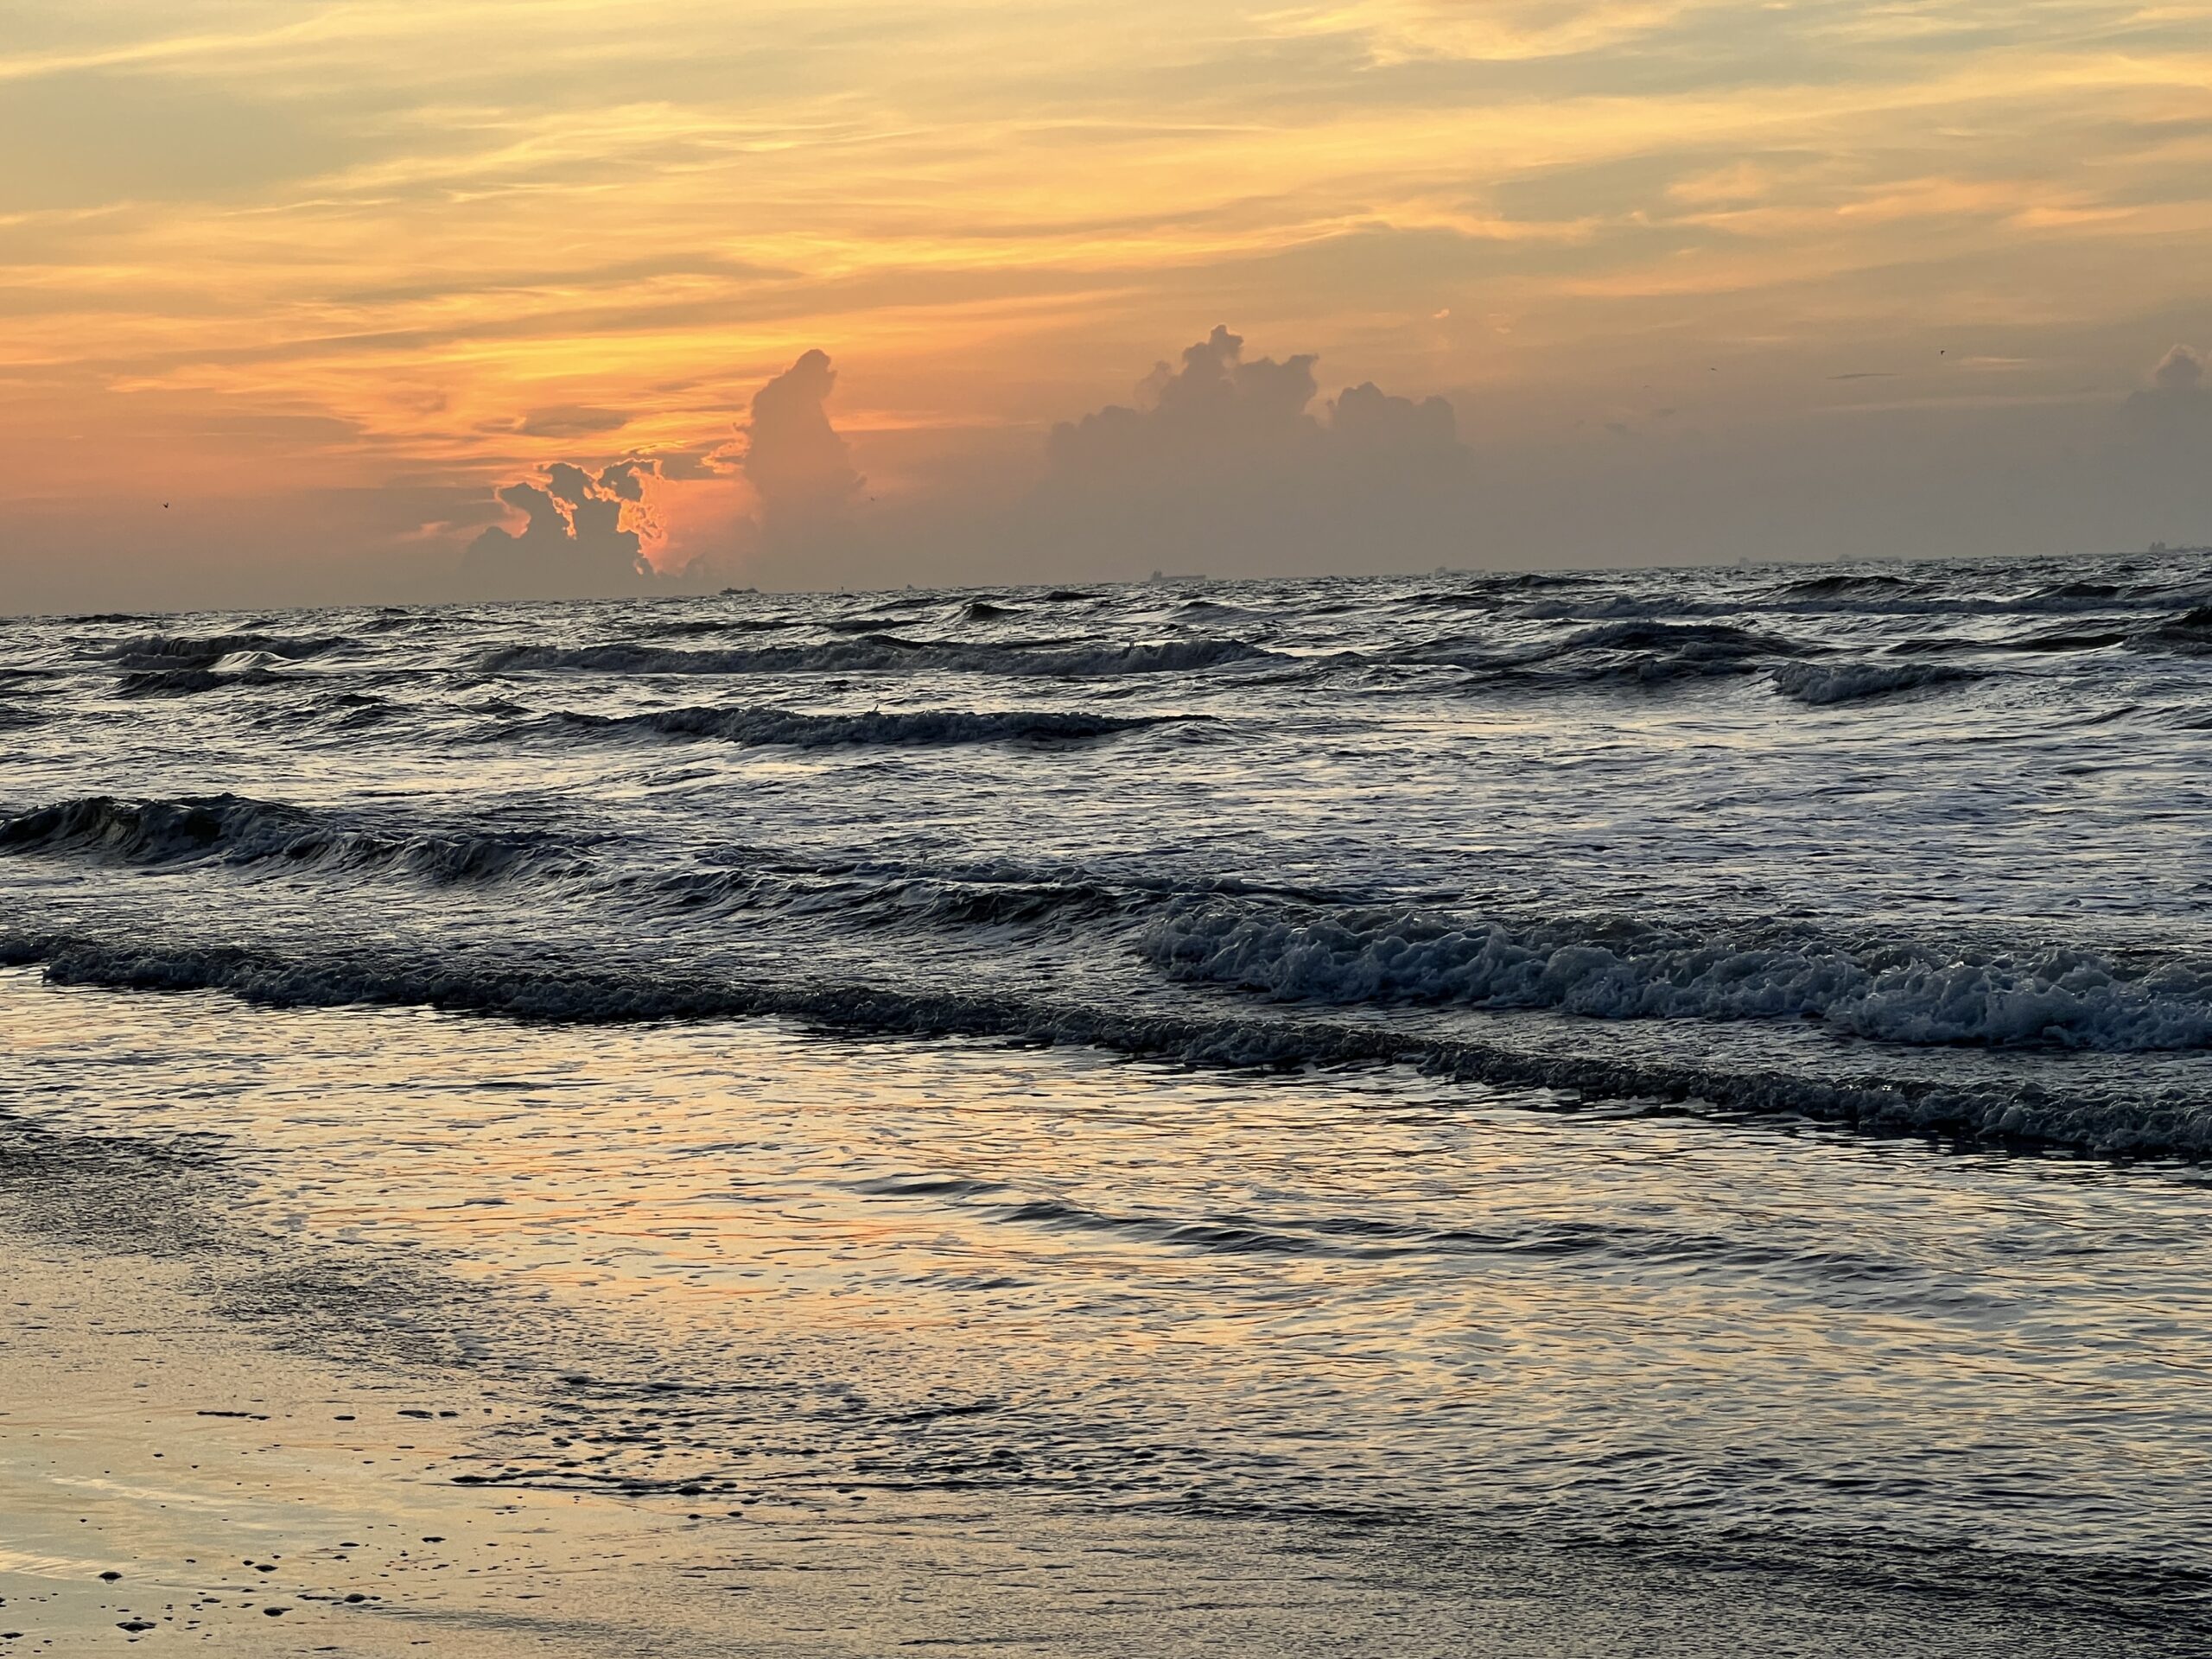 Business Growth Society Day 5 Post: Balance, Boundaries, and the Art of Reflection picture of the beach and sunset at Port Aransas, Texas